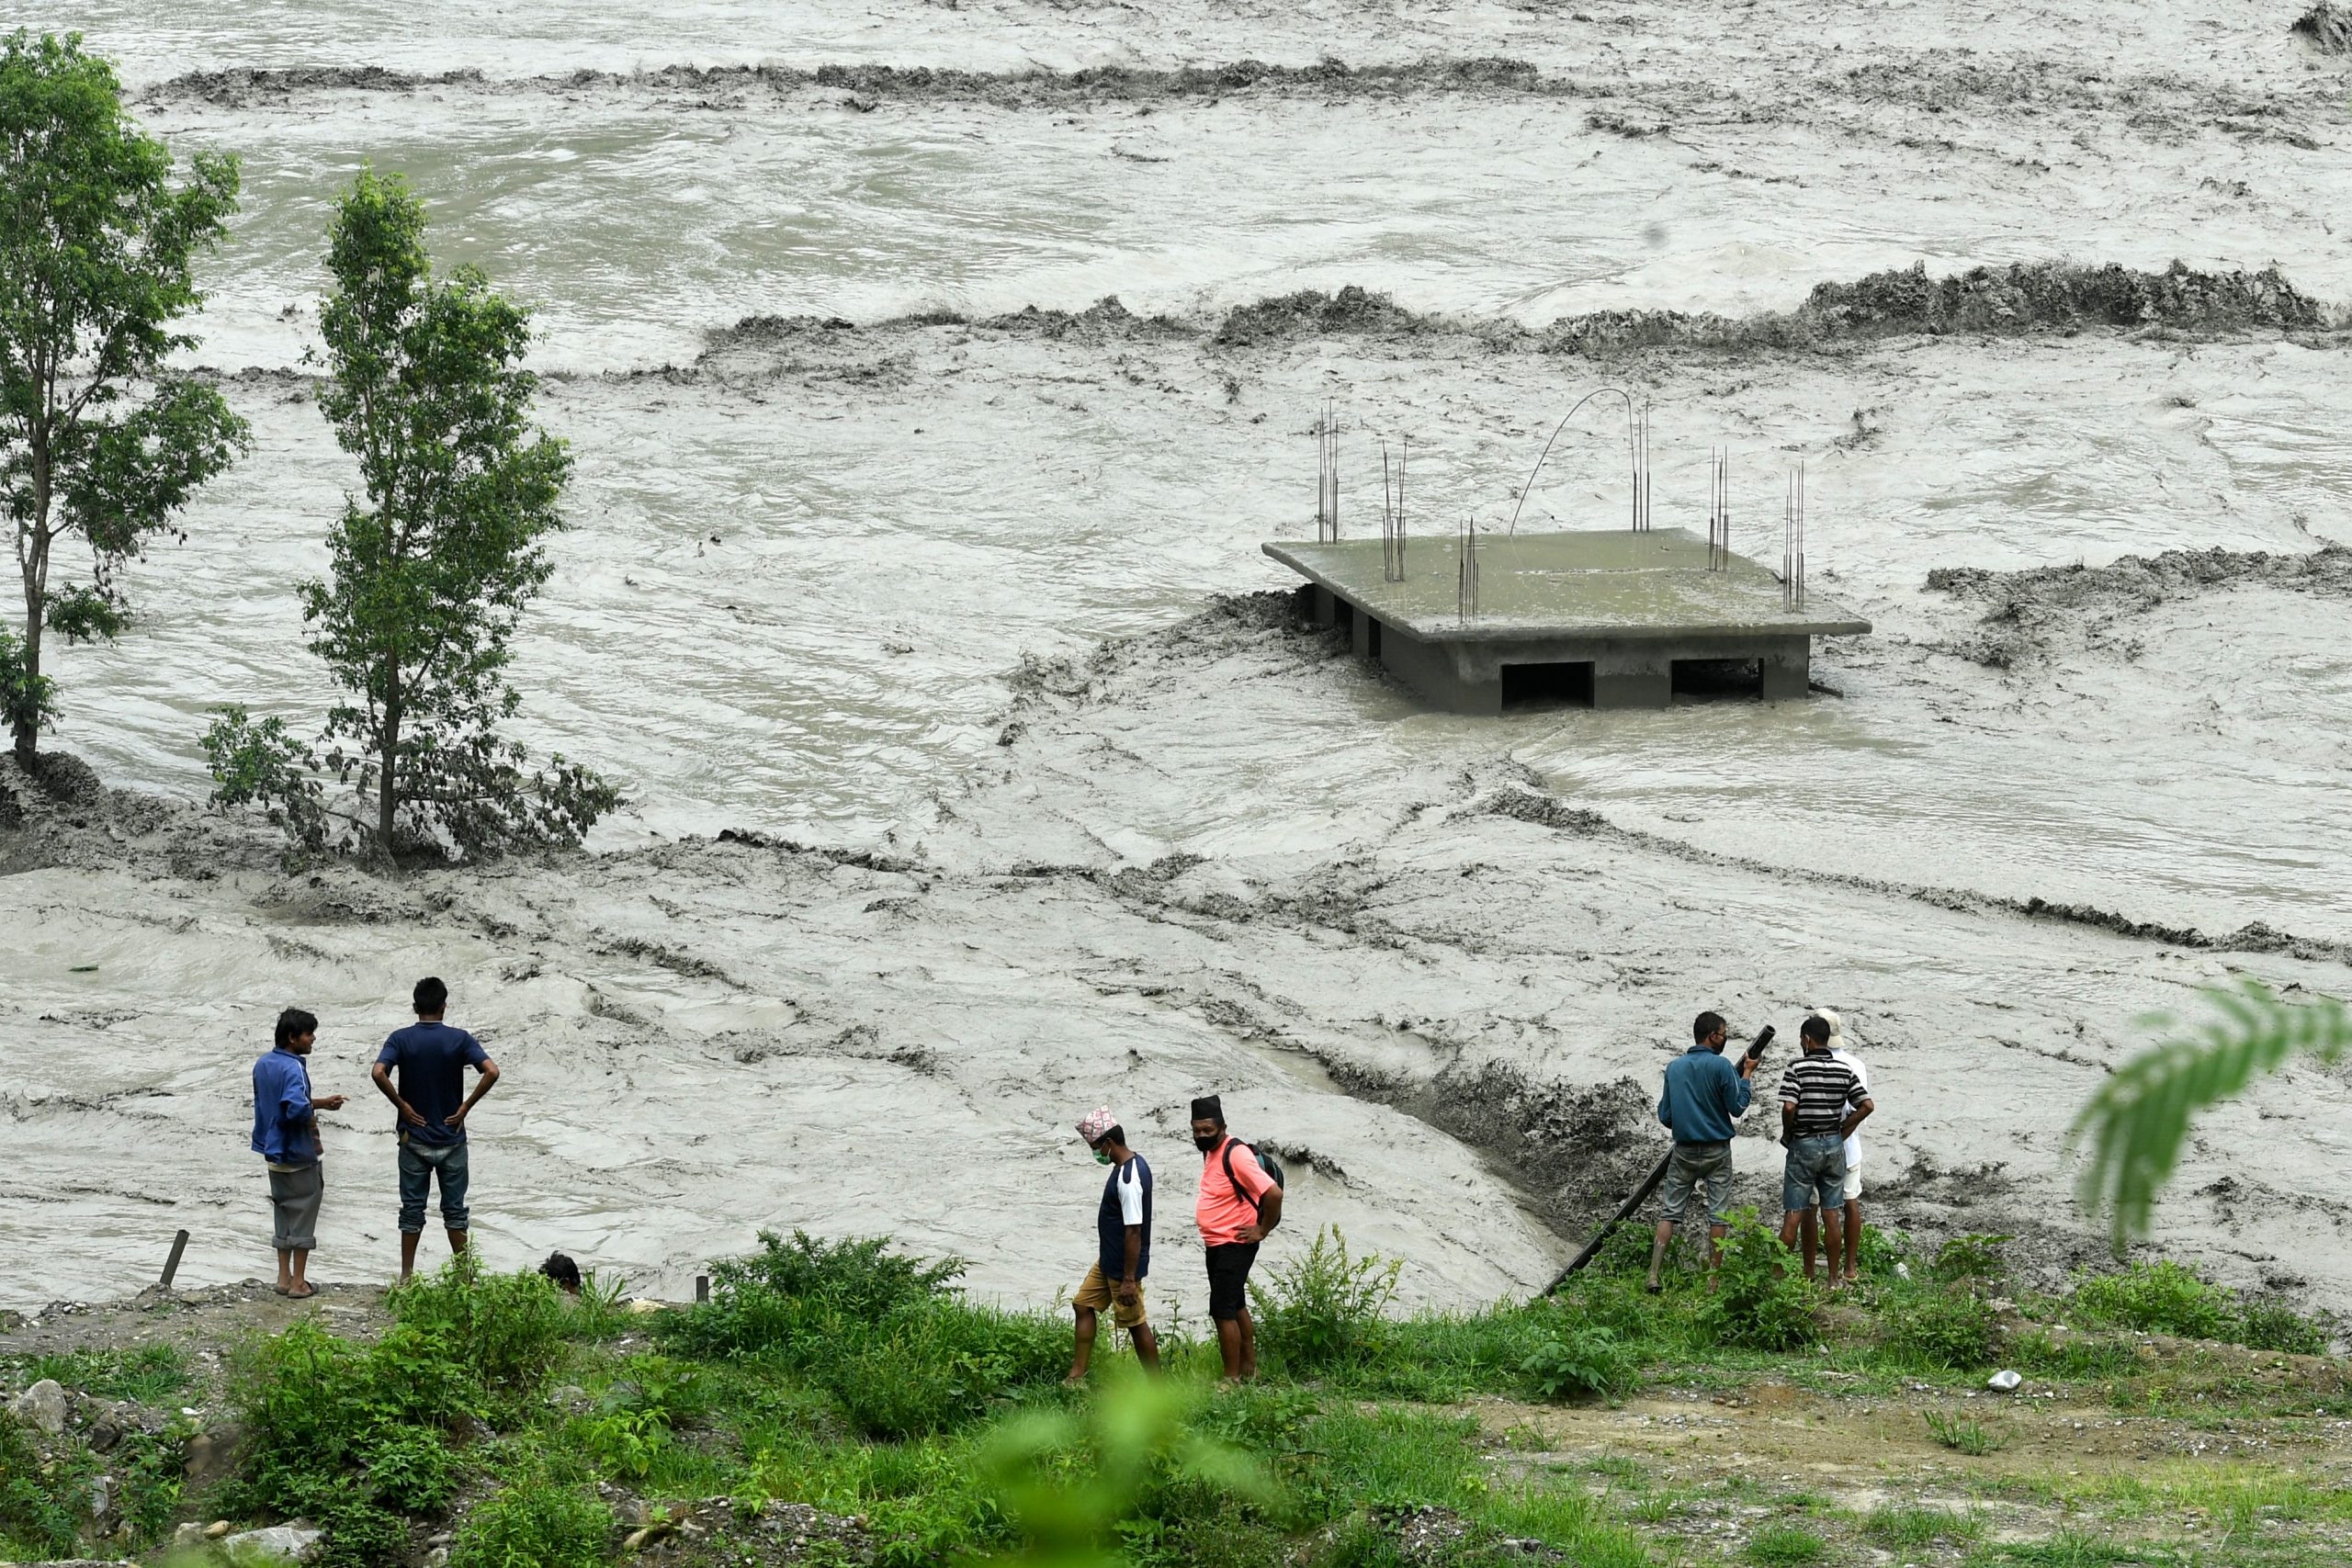 Death toll rises to 12 as flash floods hit Bhutan and Nepal